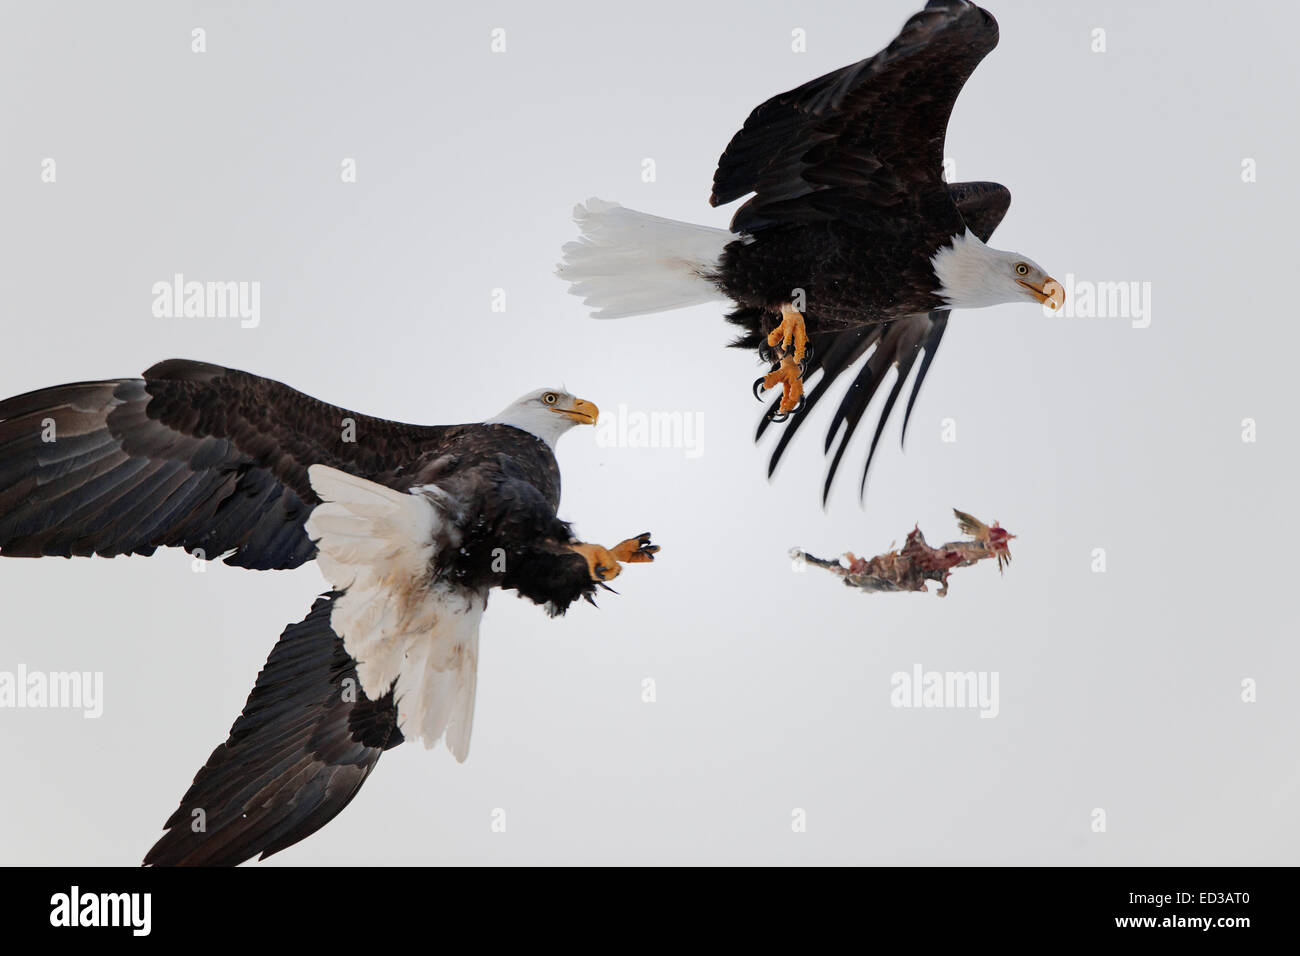 Eagles fight in air. Two Bald Eagles (Haliaeetus leucocephalus washingtoniensis ) fight in air because of a piece of fish. Stock Photo